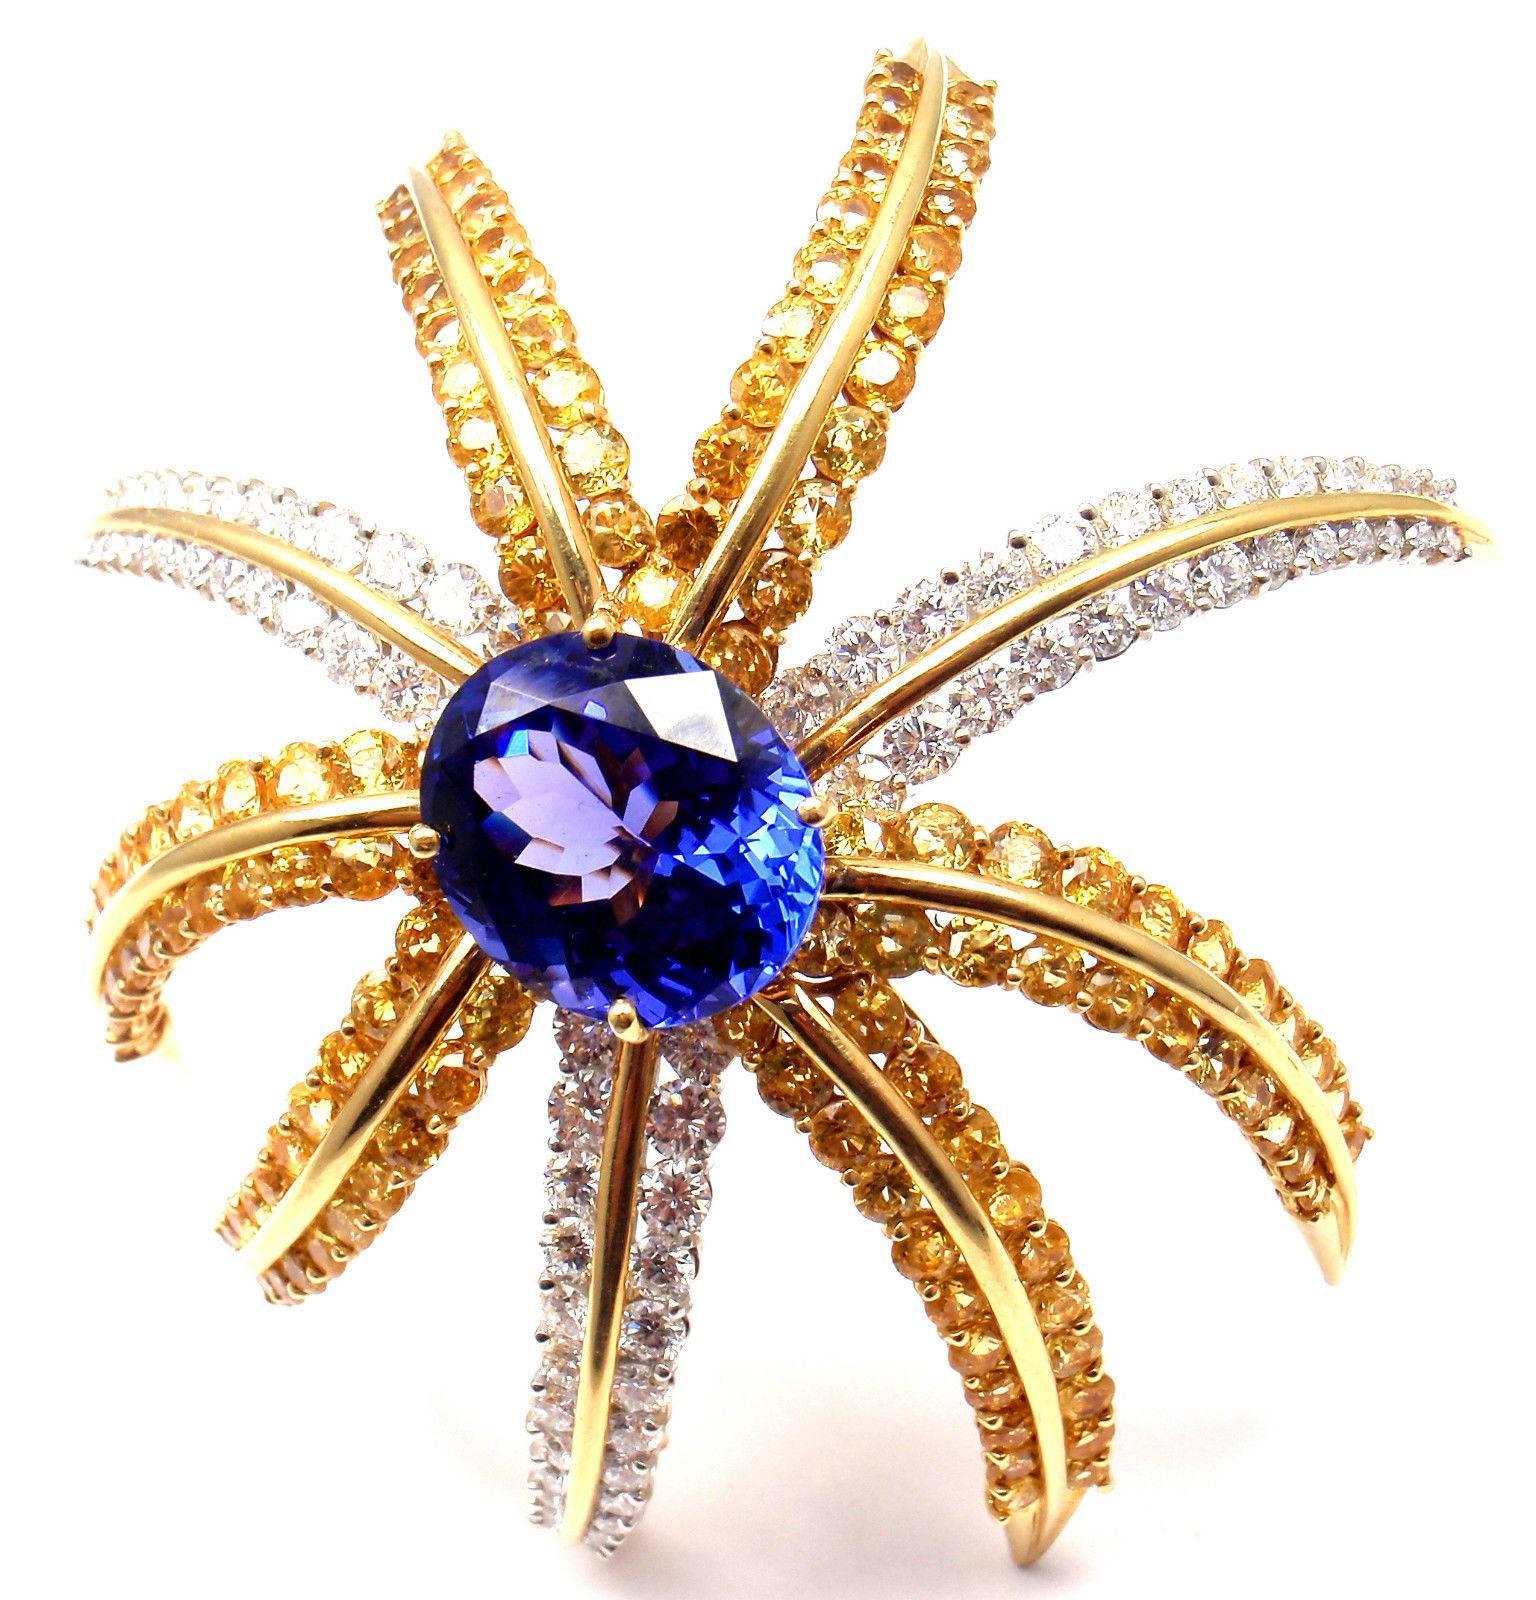 Platinum And 18k Yellow Gold Diamond Yellow Sapphire Tanzanite Fireworks Pin Brooch by Tiffany & Co.  
This brooch comes with original Tiffany & Co box and a Replacement Valuation from 2008 for $26,0000.
With 78 round brilliant cut diamonds VVS1